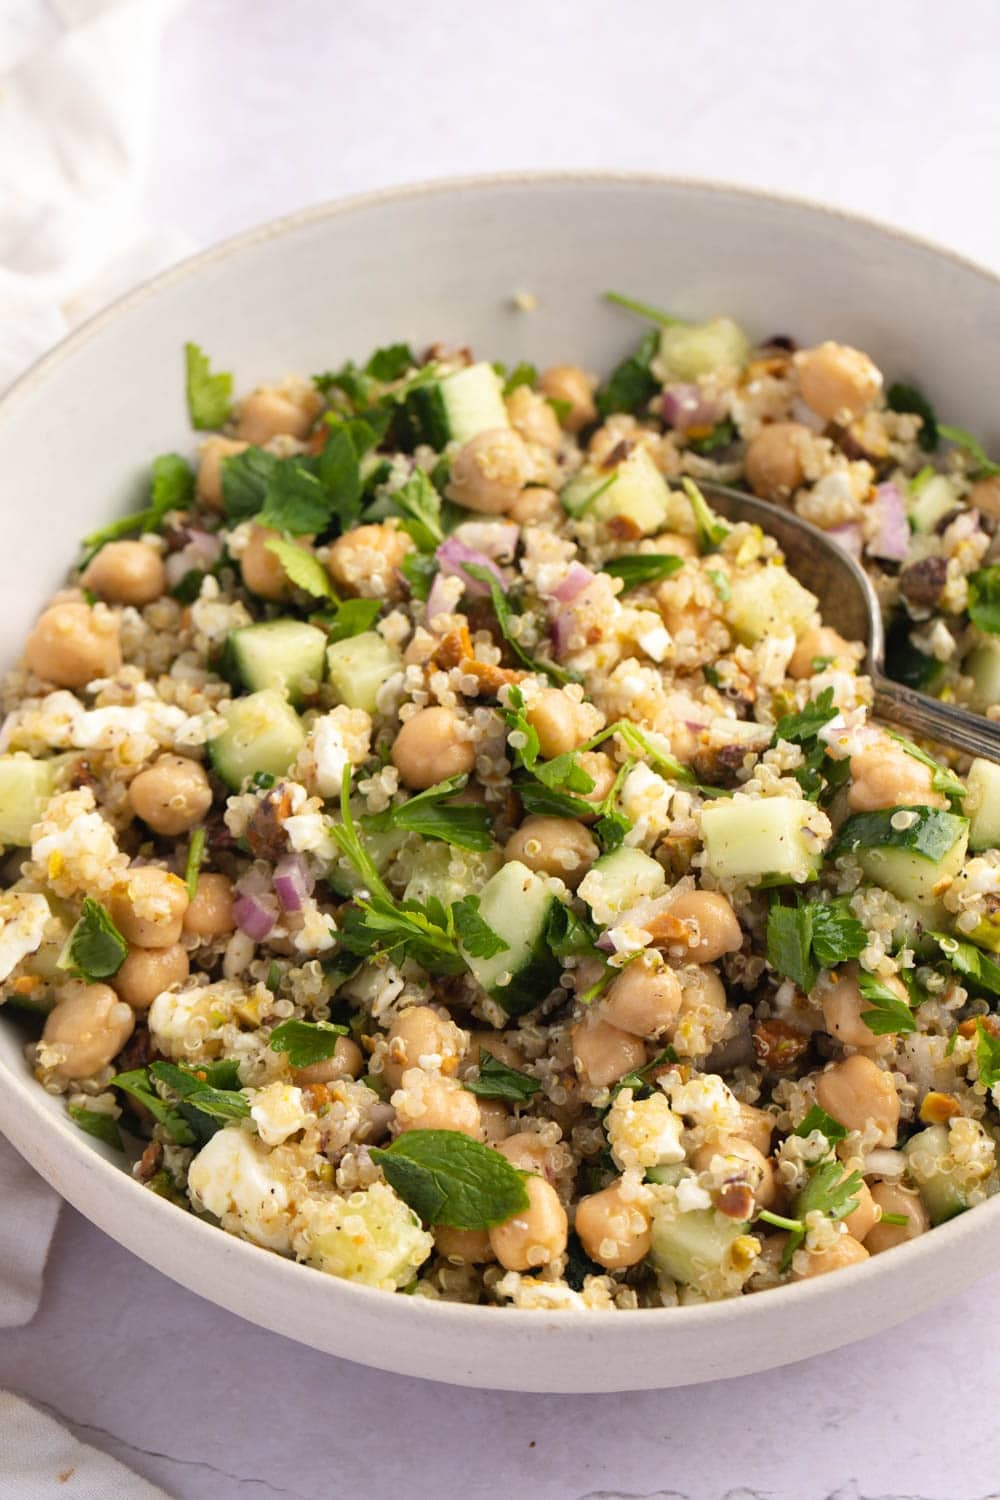 Jennifer Anniston Salad with Quinoa, Cucumber, Parsley and Onions in a White Bowl